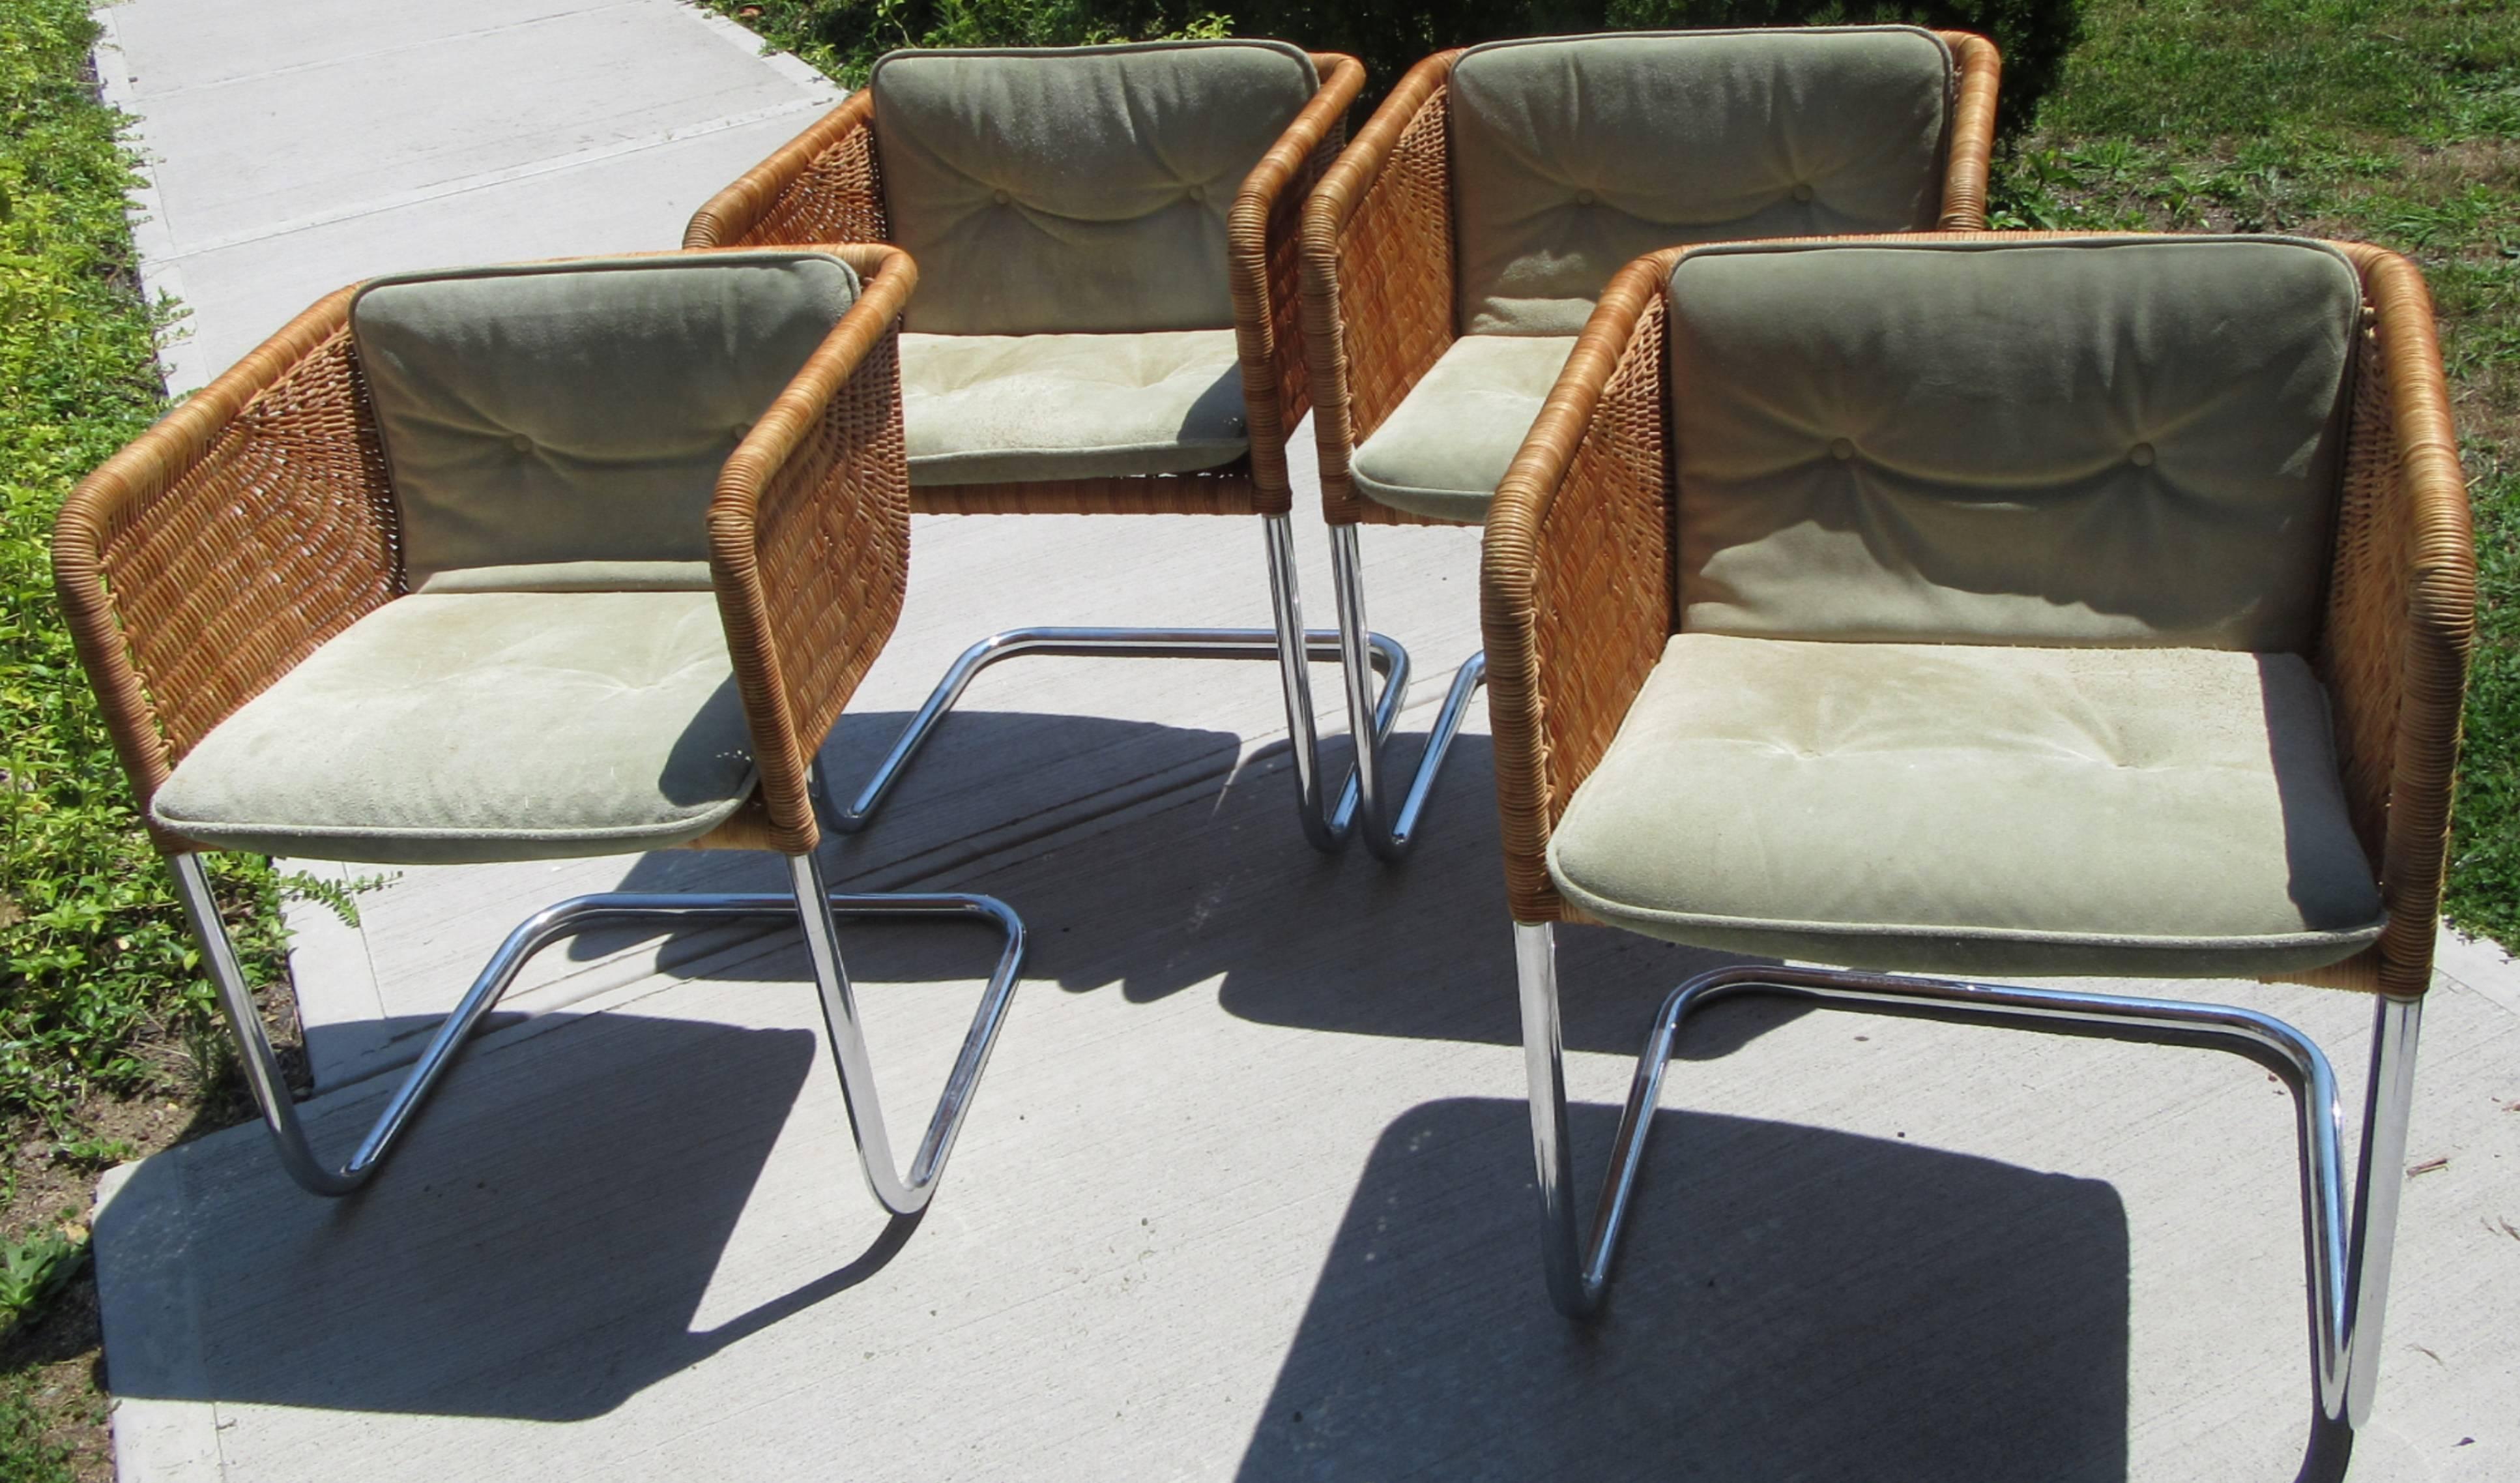 Set of four cantilevered dining chairs designed by Preban Fabricius & Jorgen Kastholm in Denmark and sold exclusively by Harvey Probber in the US. These feature a tubular chrome frame with a woven wicker seat 'basket'. The original cushions are